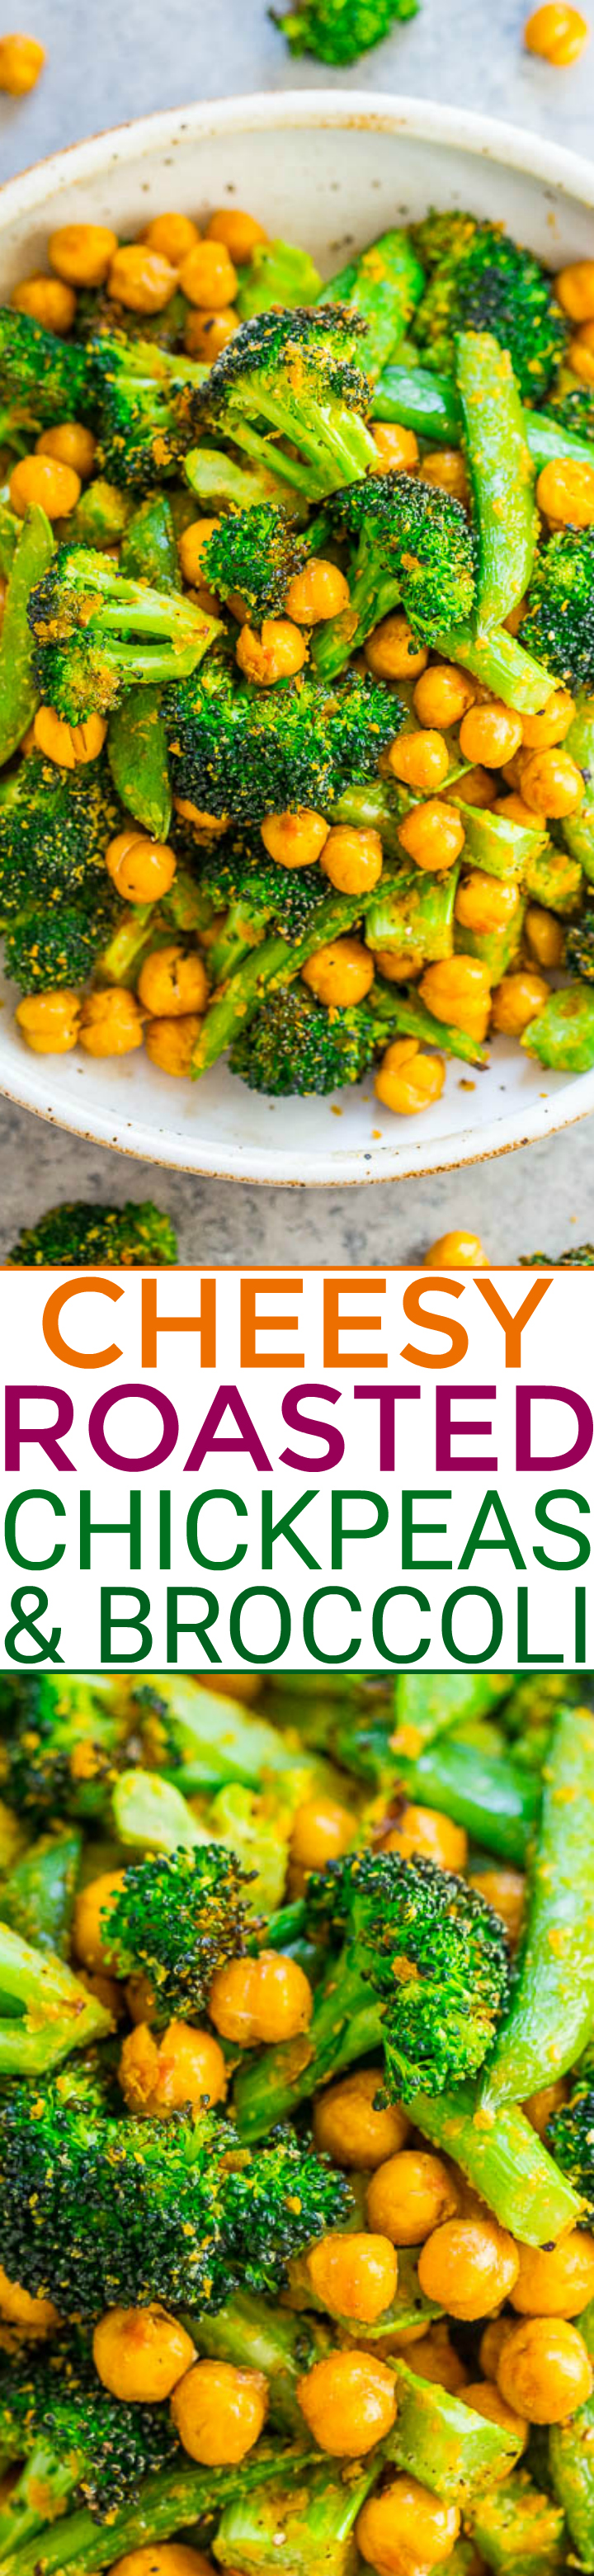 Cheesy Roasted Broccoli and Chickpeas — Fast, EASY, healthy, and keeps you full and satisfied!! Vegan and gluten-free doesn't have to be boring! Perfect lunch, hearty side, or meatless main! You're going to LOVE the cheesy touch!!